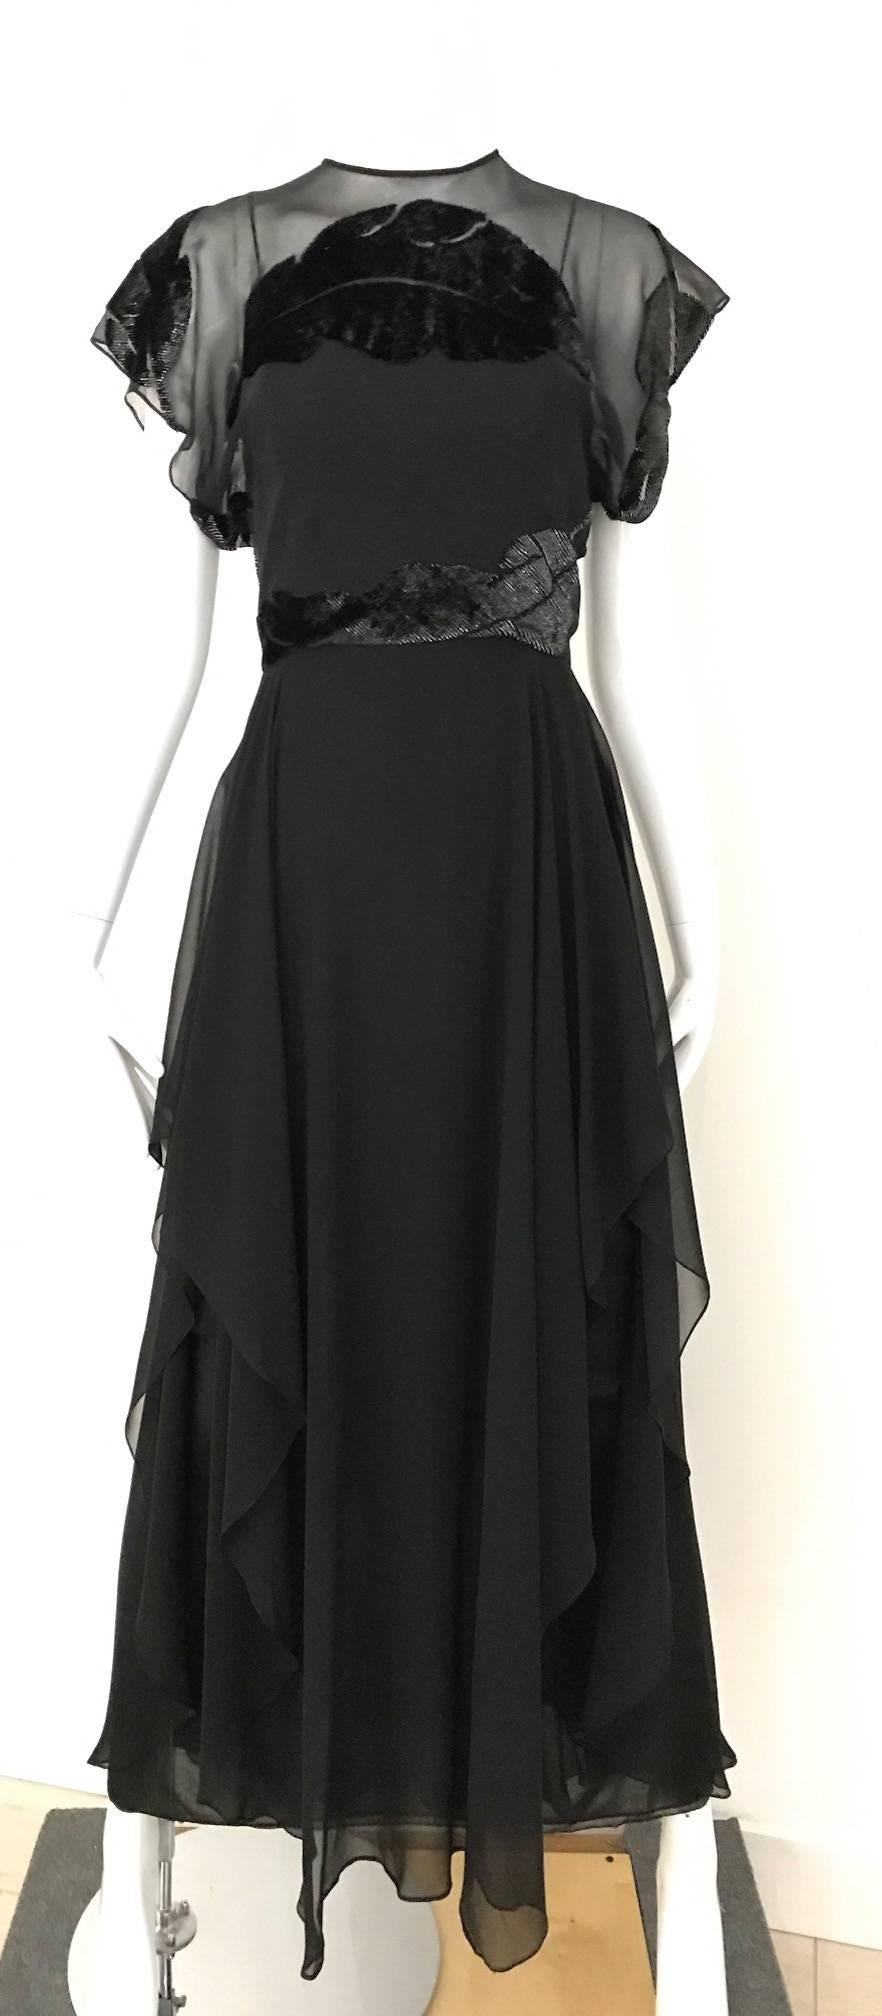 Beautiful Vintage 1970s Neiman Marcus Black Silk Chiffon Dress with overlay velvet cut out leaves  pattern on the bodice and the back. There are three layer of silk chiffon.
Size: 2/4 Small
Bust: 34 inch/ Waist: 26 inch/ Hip : Open/ Dress Length :